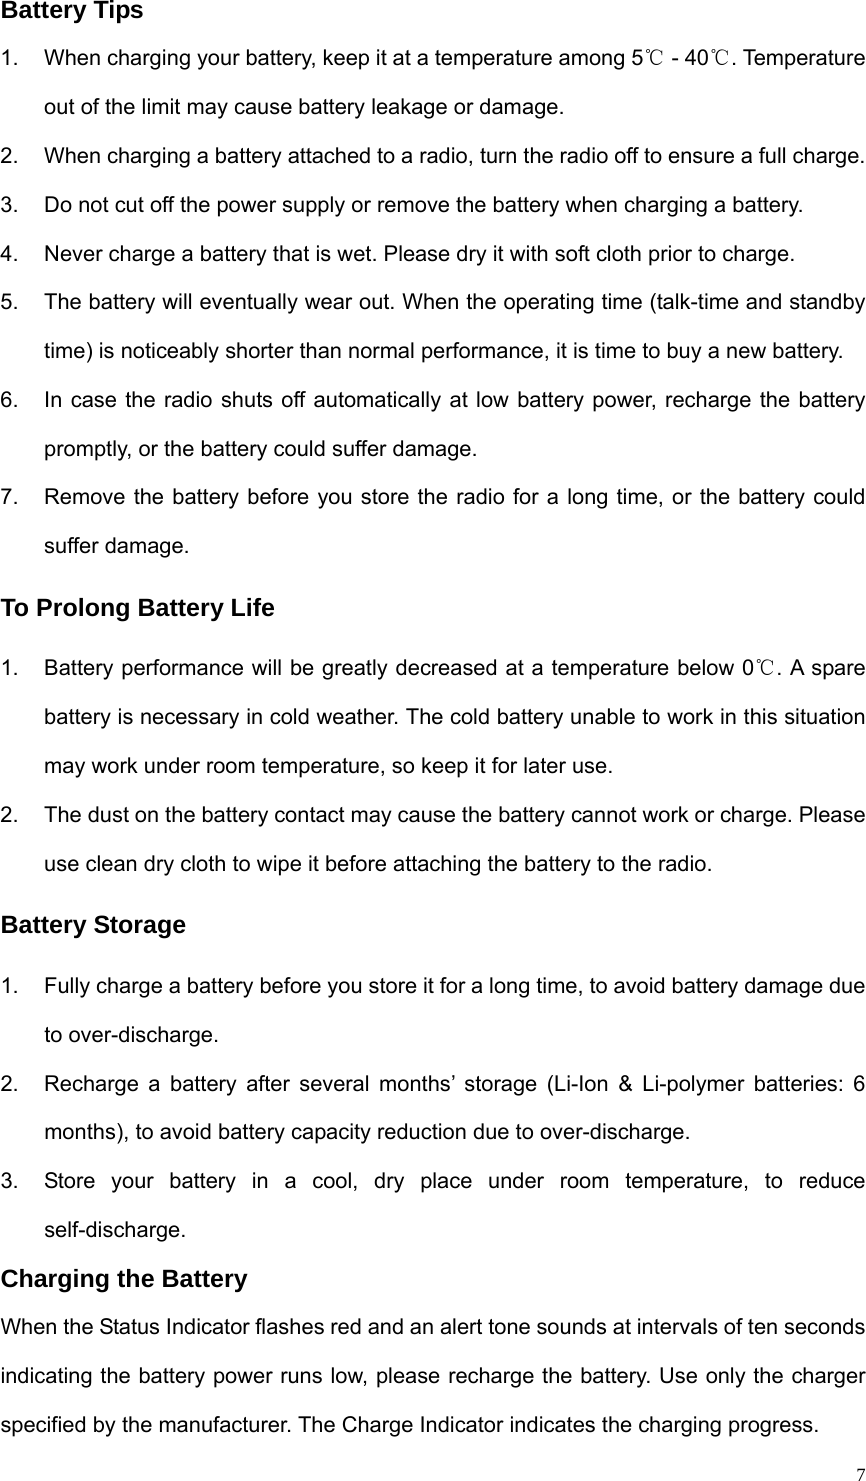   7Battery Tips 1.  When charging your battery, keep it at a temperature among 5  ℃- 40 . Temperature ℃out of the limit may cause battery leakage or damage. 2.  When charging a battery attached to a radio, turn the radio off to ensure a full charge. 3.  Do not cut off the power supply or remove the battery when charging a battery. 4.  Never charge a battery that is wet. Please dry it with soft cloth prior to charge. 5.  The battery will eventually wear out. When the operating time (talk-time and standby time) is noticeably shorter than normal performance, it is time to buy a new battery. 6.  In case the radio shuts off automatically at low battery power, recharge the battery promptly, or the battery could suffer damage.   7.  Remove the battery before you store the radio for a long time, or the battery could suffer damage.   To Prolong Battery Life 1.  Battery performance will be greatly decreased at a temperature below 0 . A spare ℃battery is necessary in cold weather. The cold battery unable to work in this situation may work under room temperature, so keep it for later use. 2.  The dust on the battery contact may cause the battery cannot work or charge. Please use clean dry cloth to wipe it before attaching the battery to the radio.   Battery Storage 1.  Fully charge a battery before you store it for a long time, to avoid battery damage due to over-discharge. 2.  Recharge a battery after several months’ storage (Li-Ion &amp; Li-polymer batteries: 6 months), to avoid battery capacity reduction due to over-discharge.   3.  Store your battery in a cool, dry place under room temperature, to reduce self-discharge. Charging the Battery When the Status Indicator flashes red and an alert tone sounds at intervals of ten seconds indicating the battery power runs low, please recharge the battery. Use only the charger specified by the manufacturer. The Charge Indicator indicates the charging progress. 